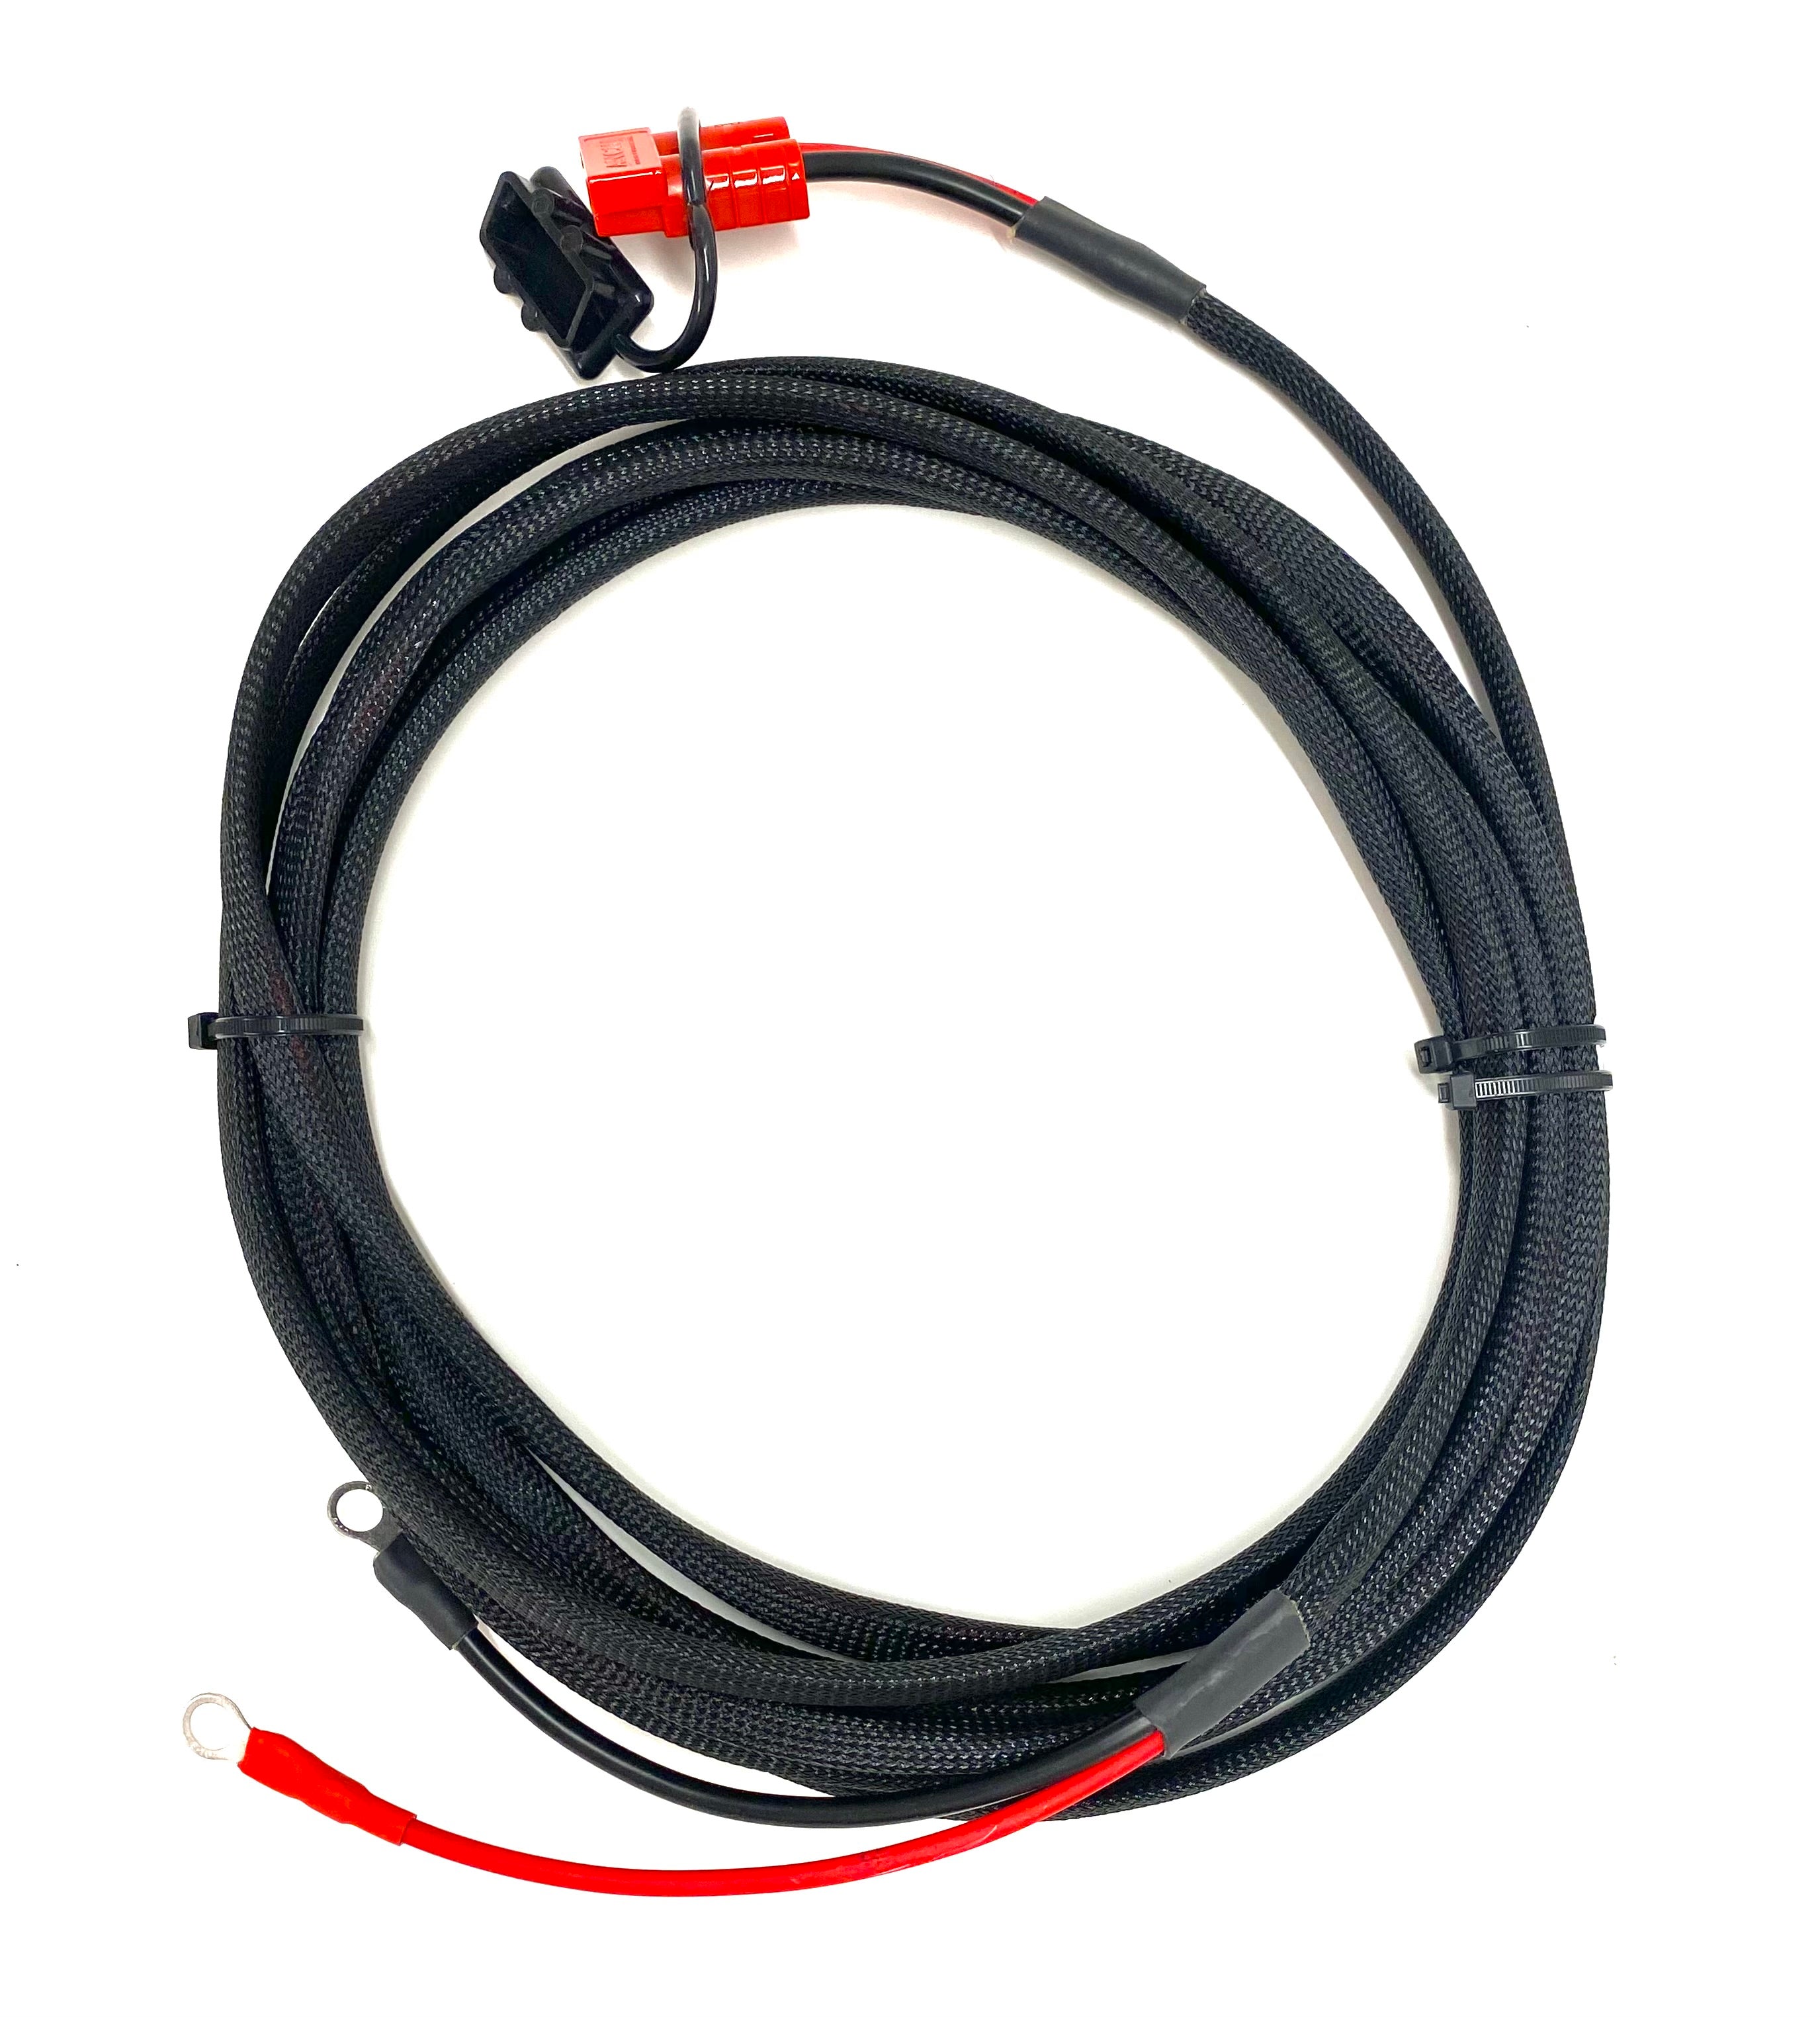 A close-up of RoaDCharger 35 Amp DC-to-DC battery charger with 20 wire whip. Black and red cable with a red tag, ideal for commercial vehicles.